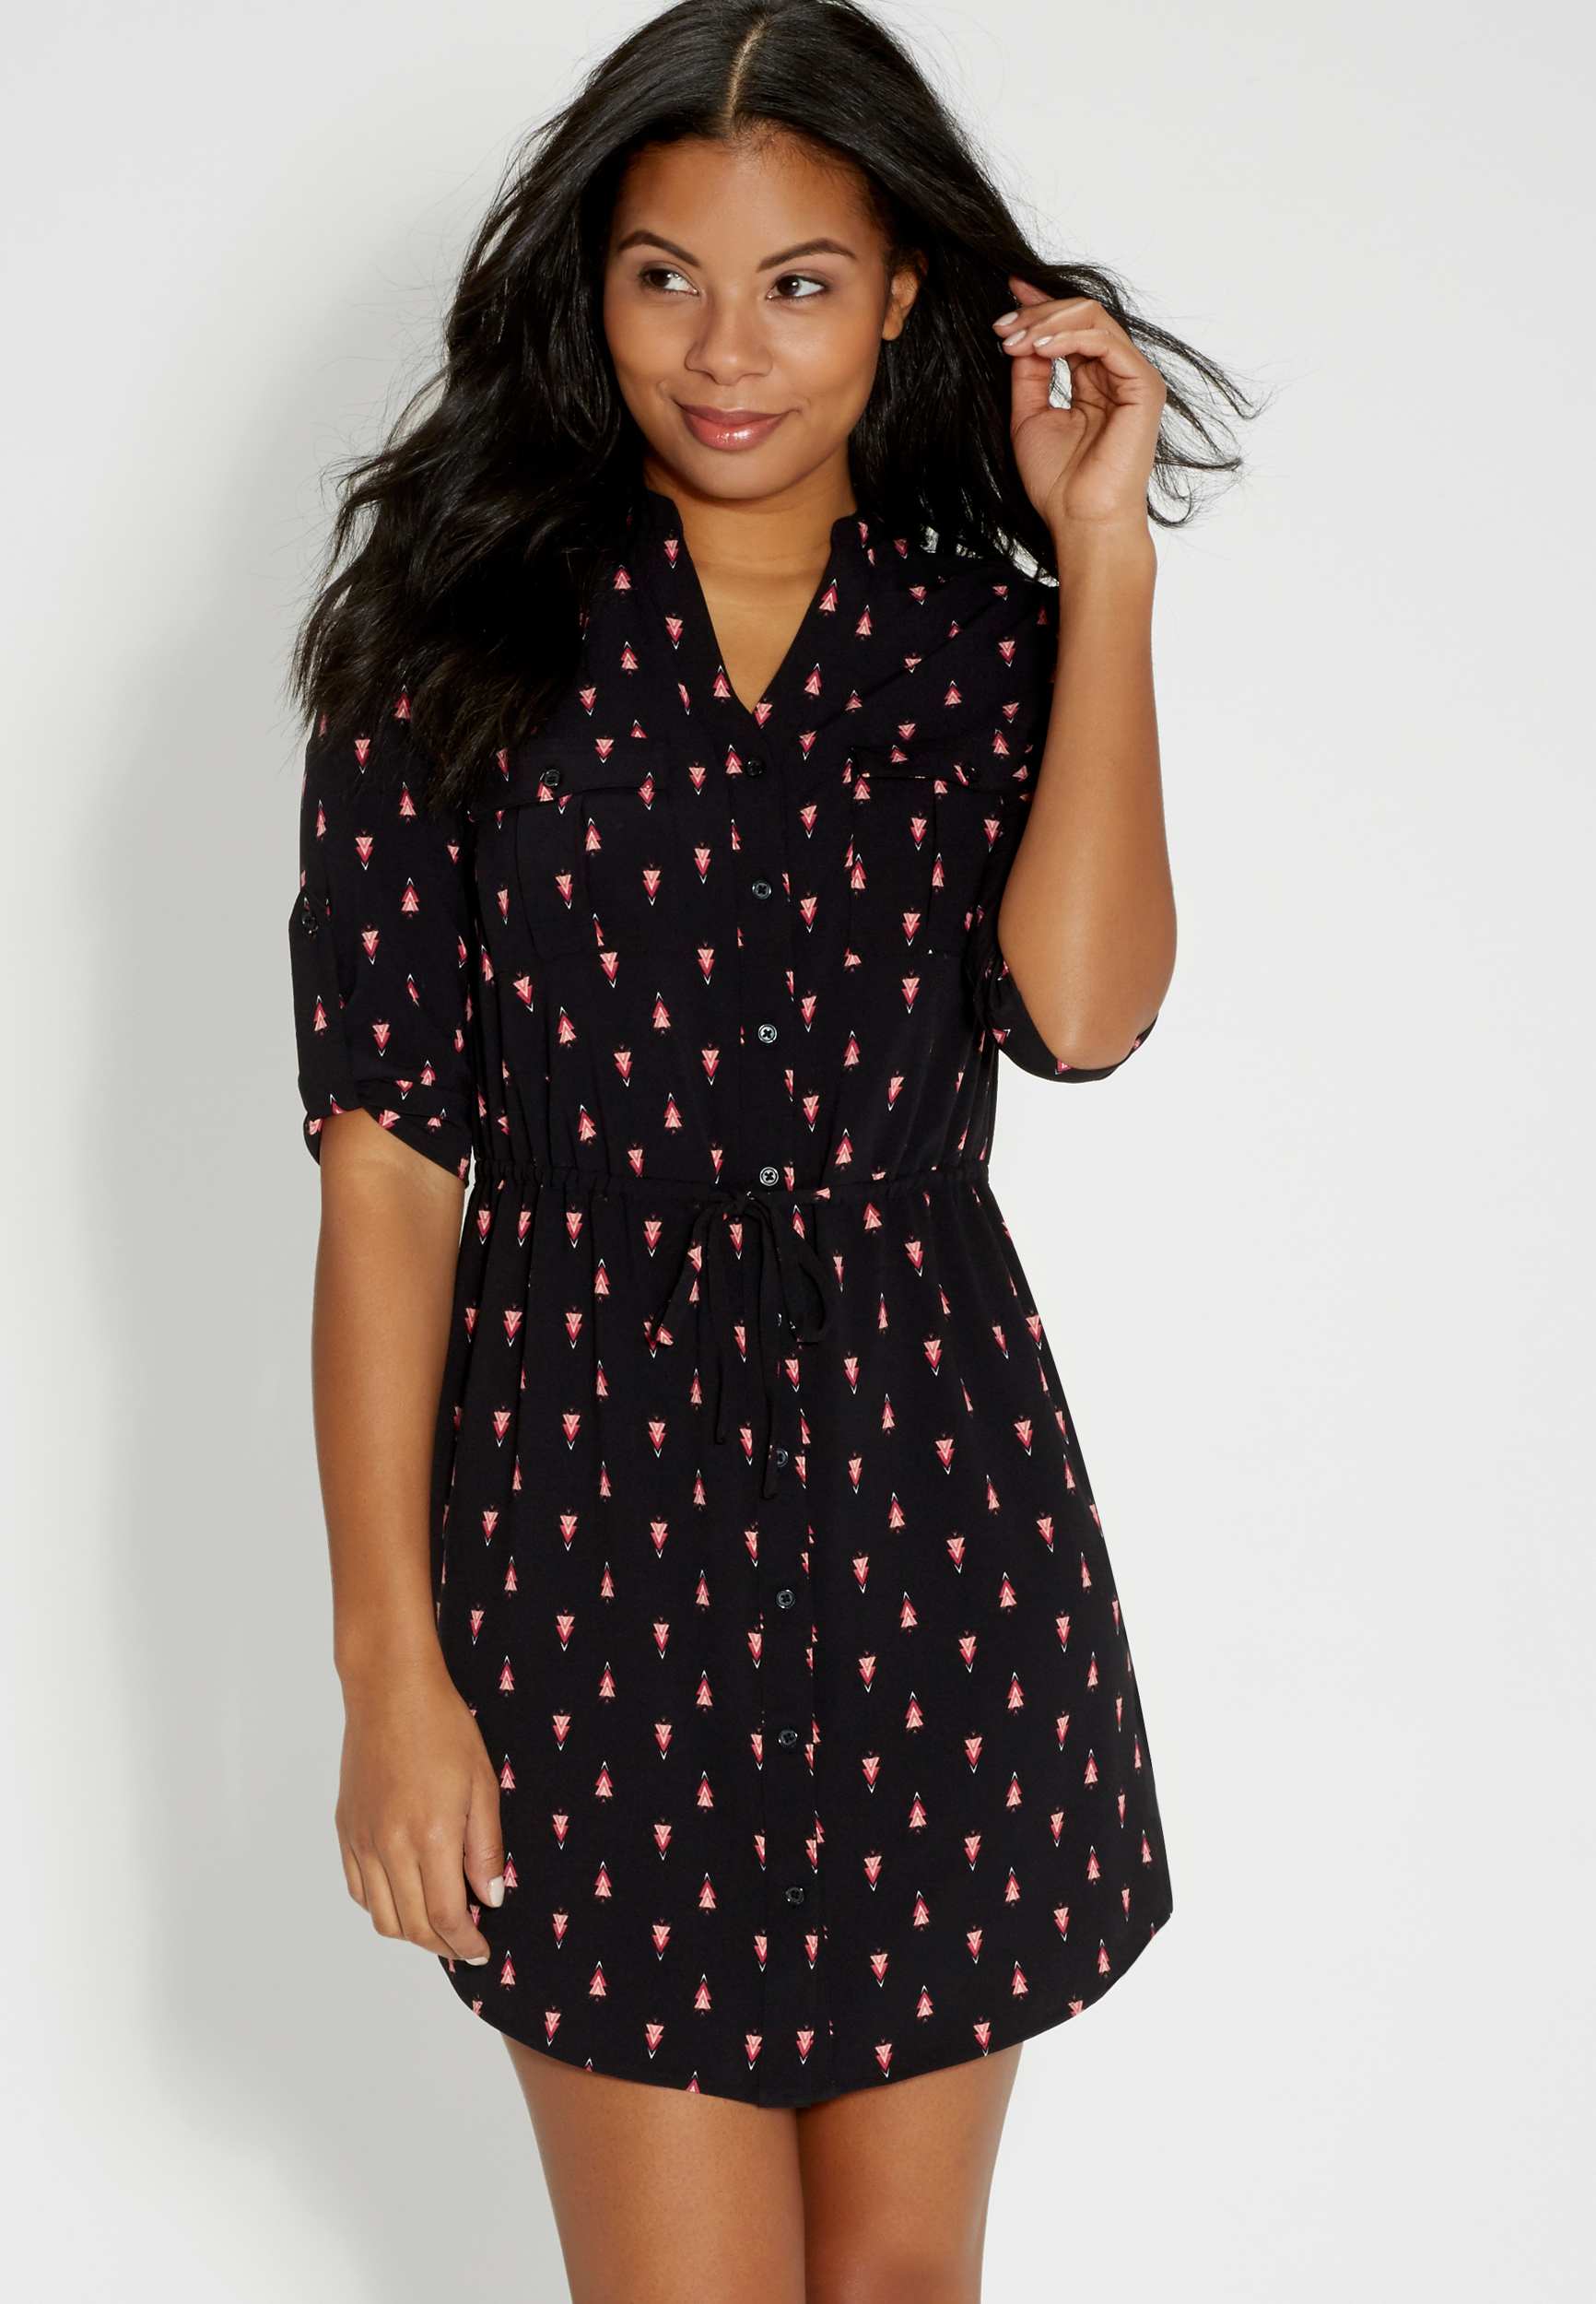 shirtdress in ethnic print | maurices